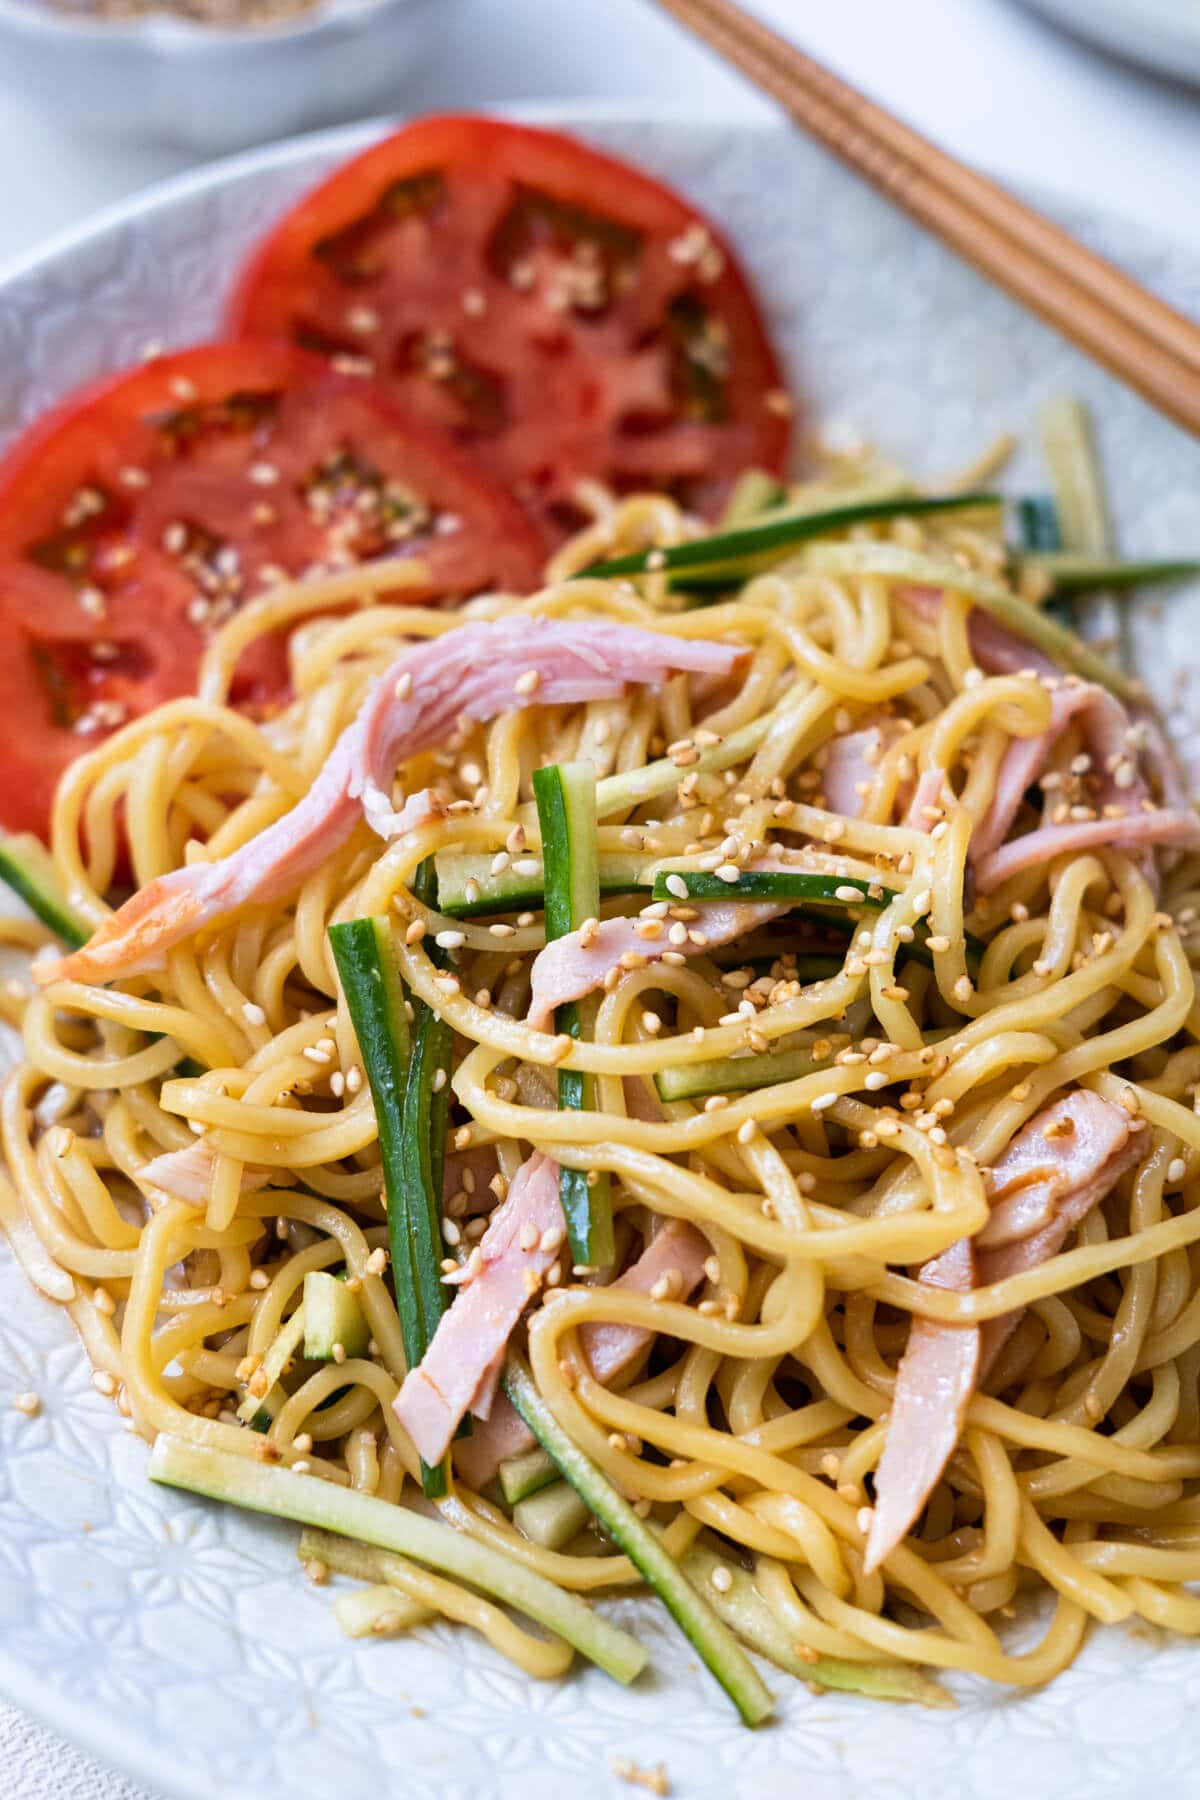 Easy and quick cold sesame noodle with tomato slices, julienne cucumber and ham slices.